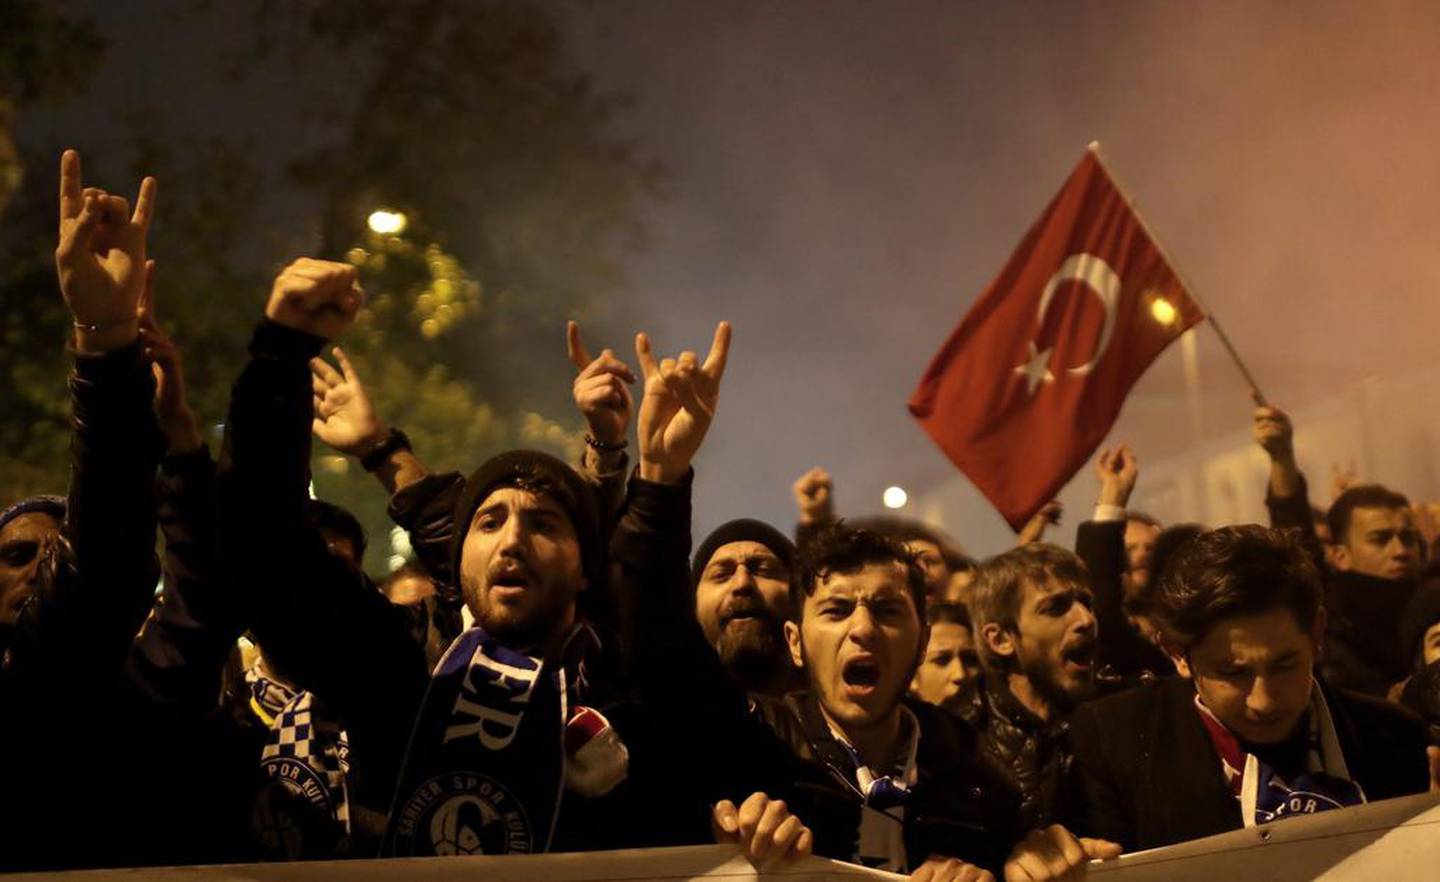 Turkish football fans shout slogans as they protest against twin bombings two days before, near the scene of one of the explosions outside the Besiktas Vodafone arena on December 10, 2016. EPA